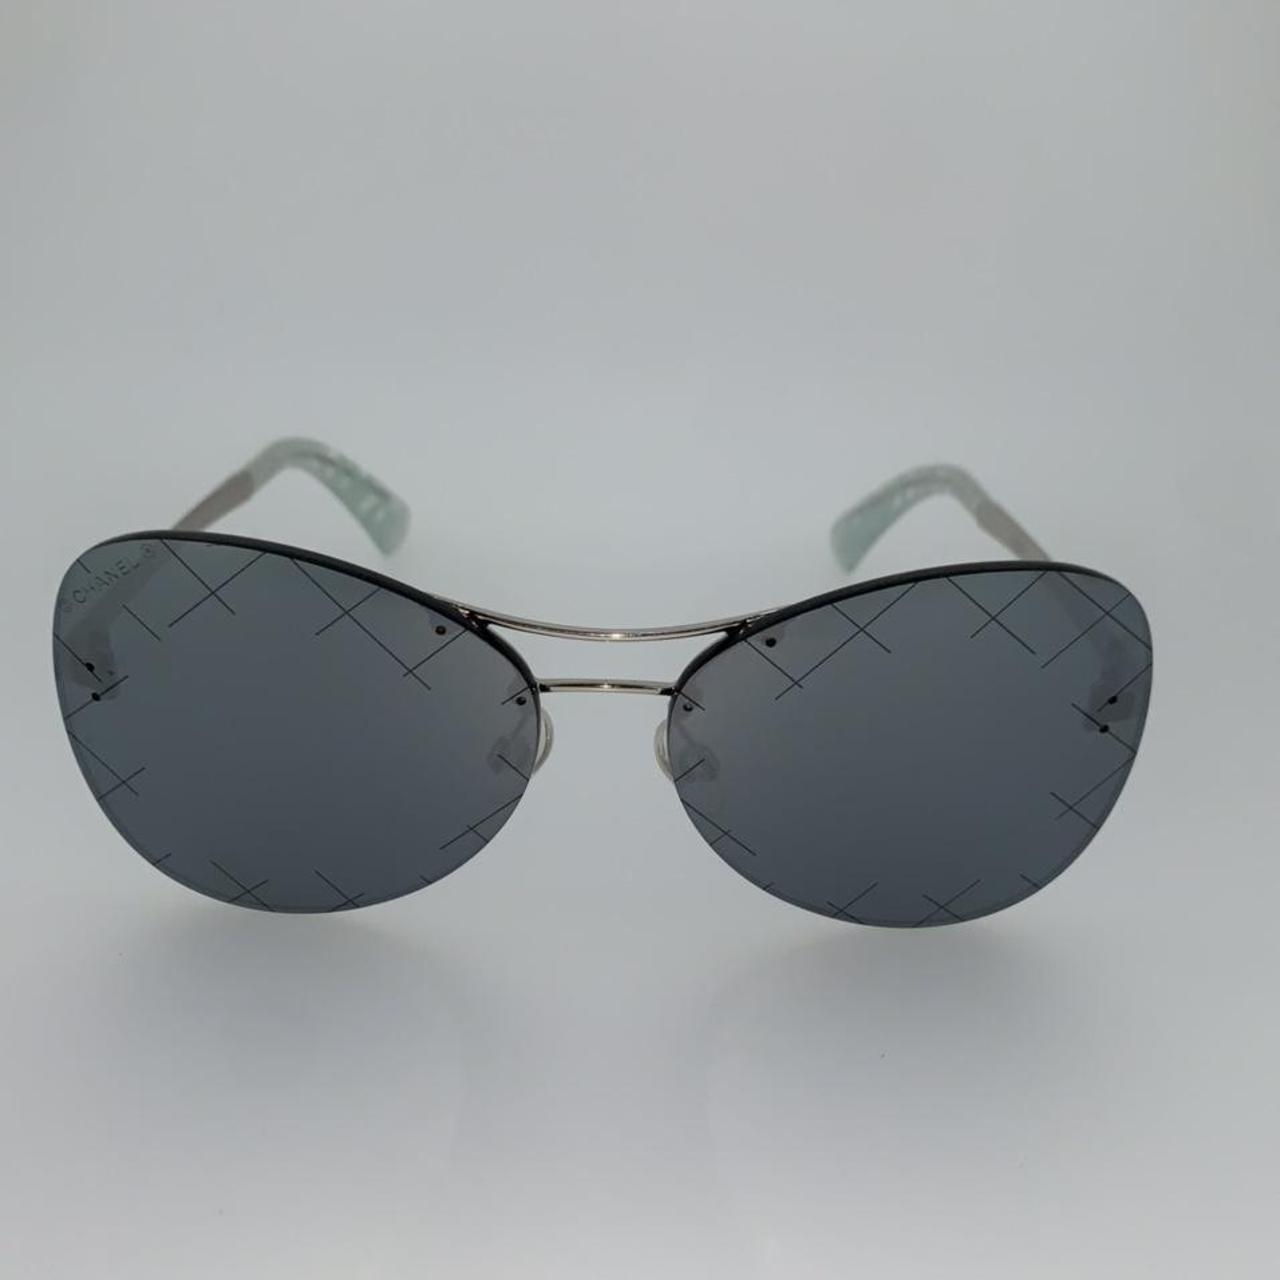 VINTAGE CHANEL SUNGLASSES - comes with case , Amazing